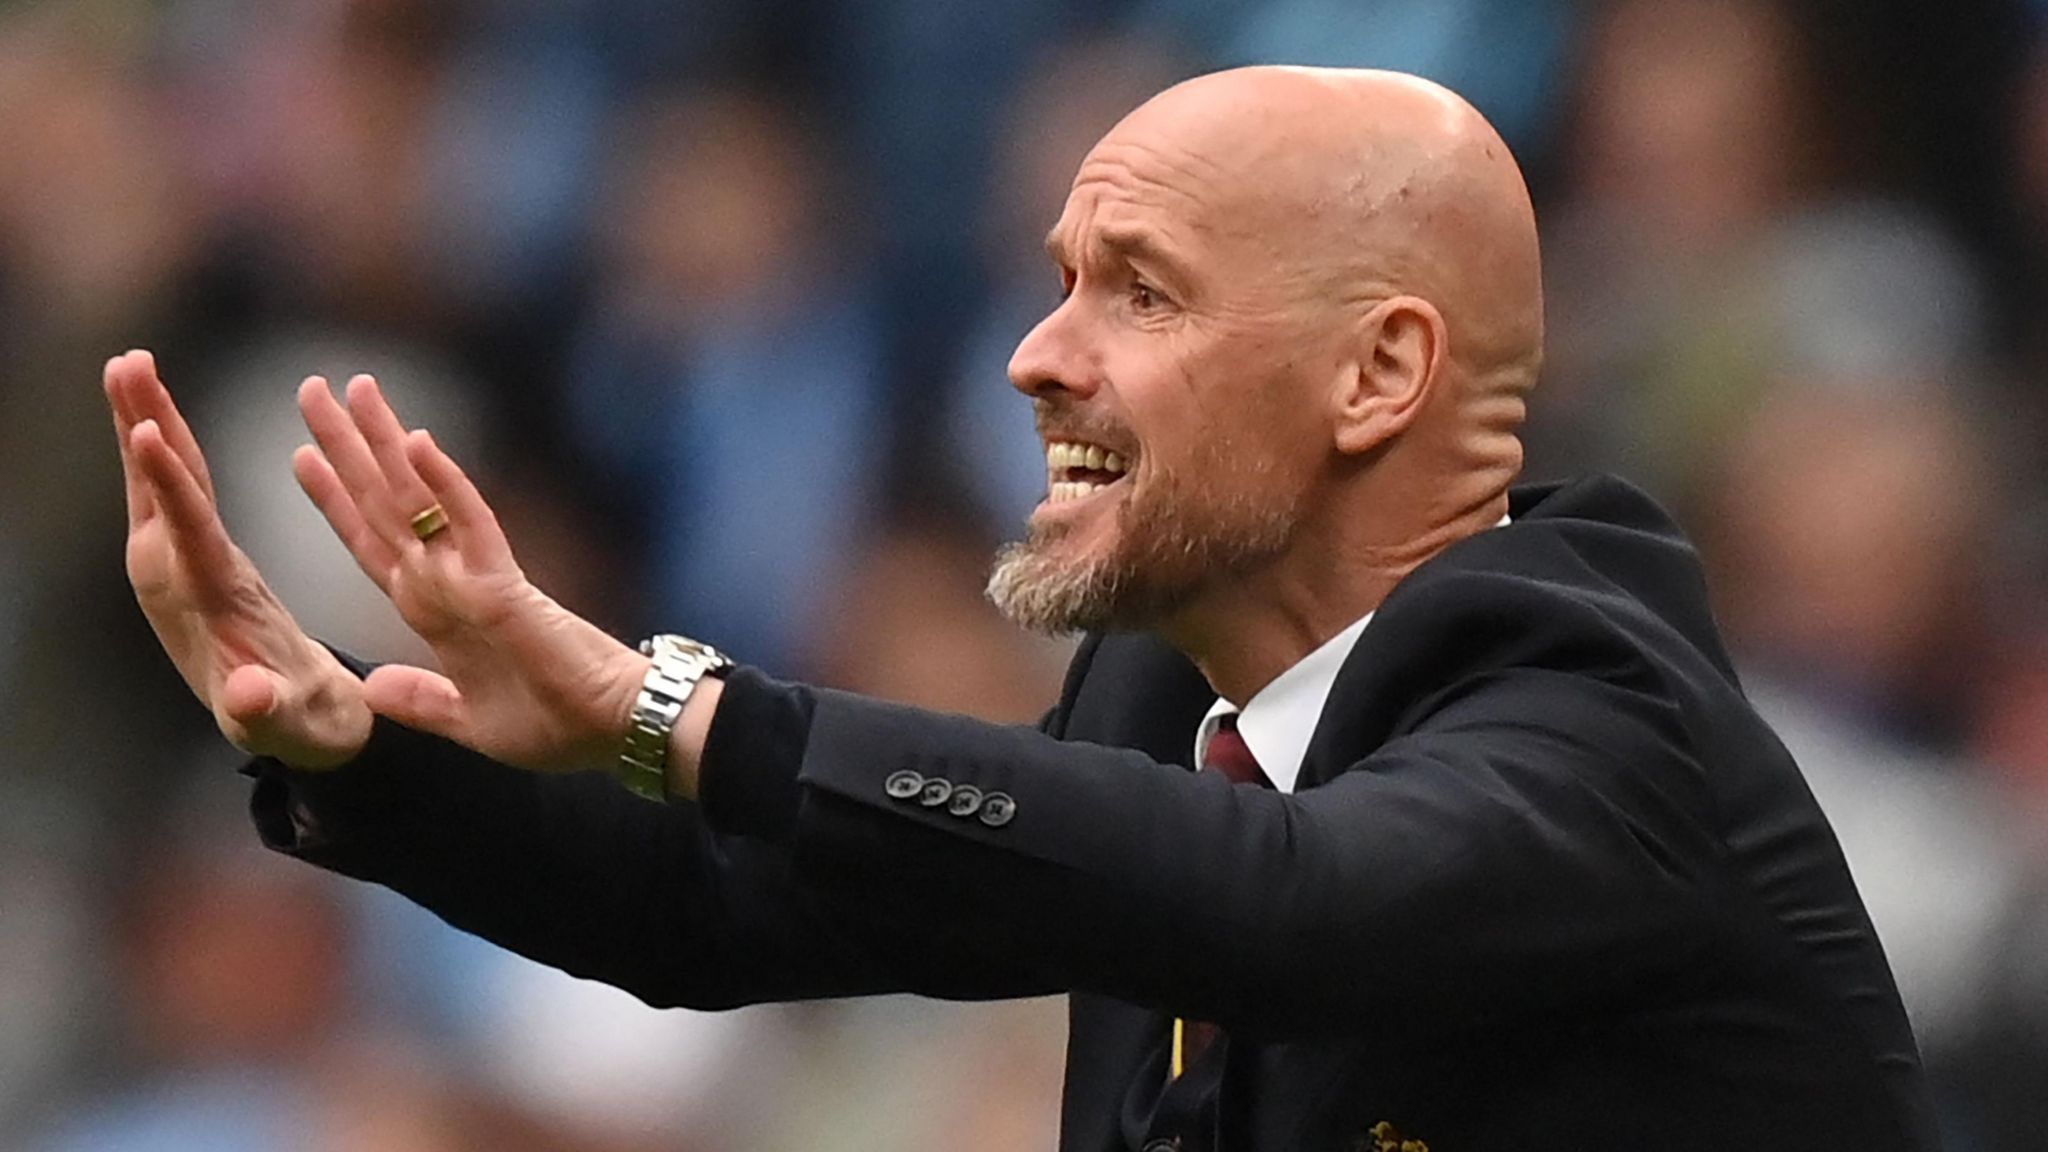 Man Utd manager Erik ten Hag says FA Cup reaction is 'a disgrace' - BBC Sport